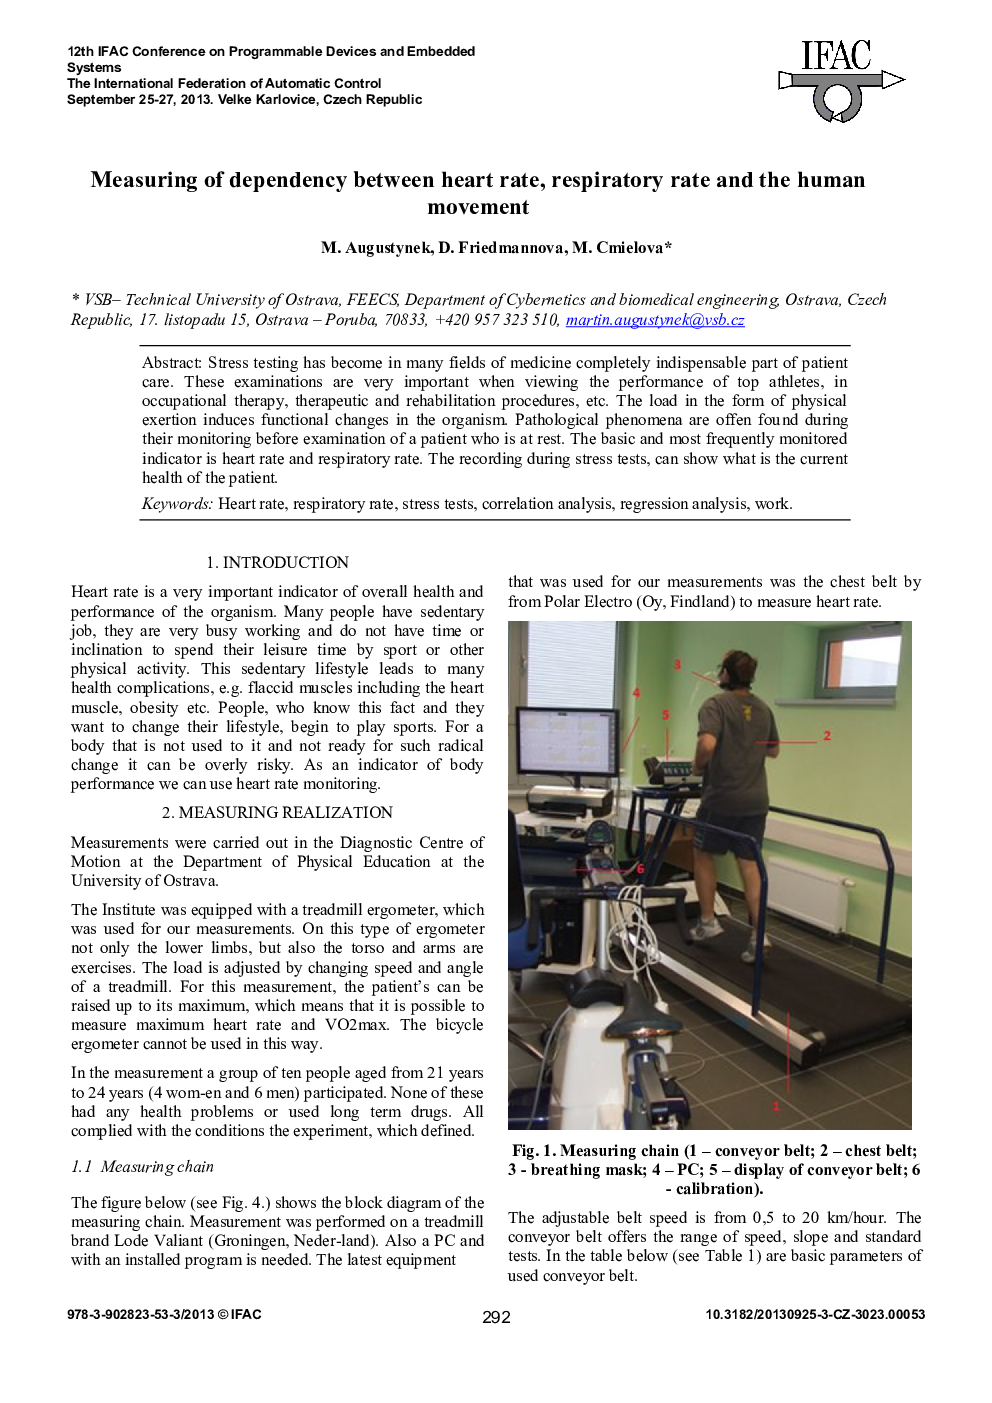 Measuring of dependency between heart rate, respiratory rate and the human movement